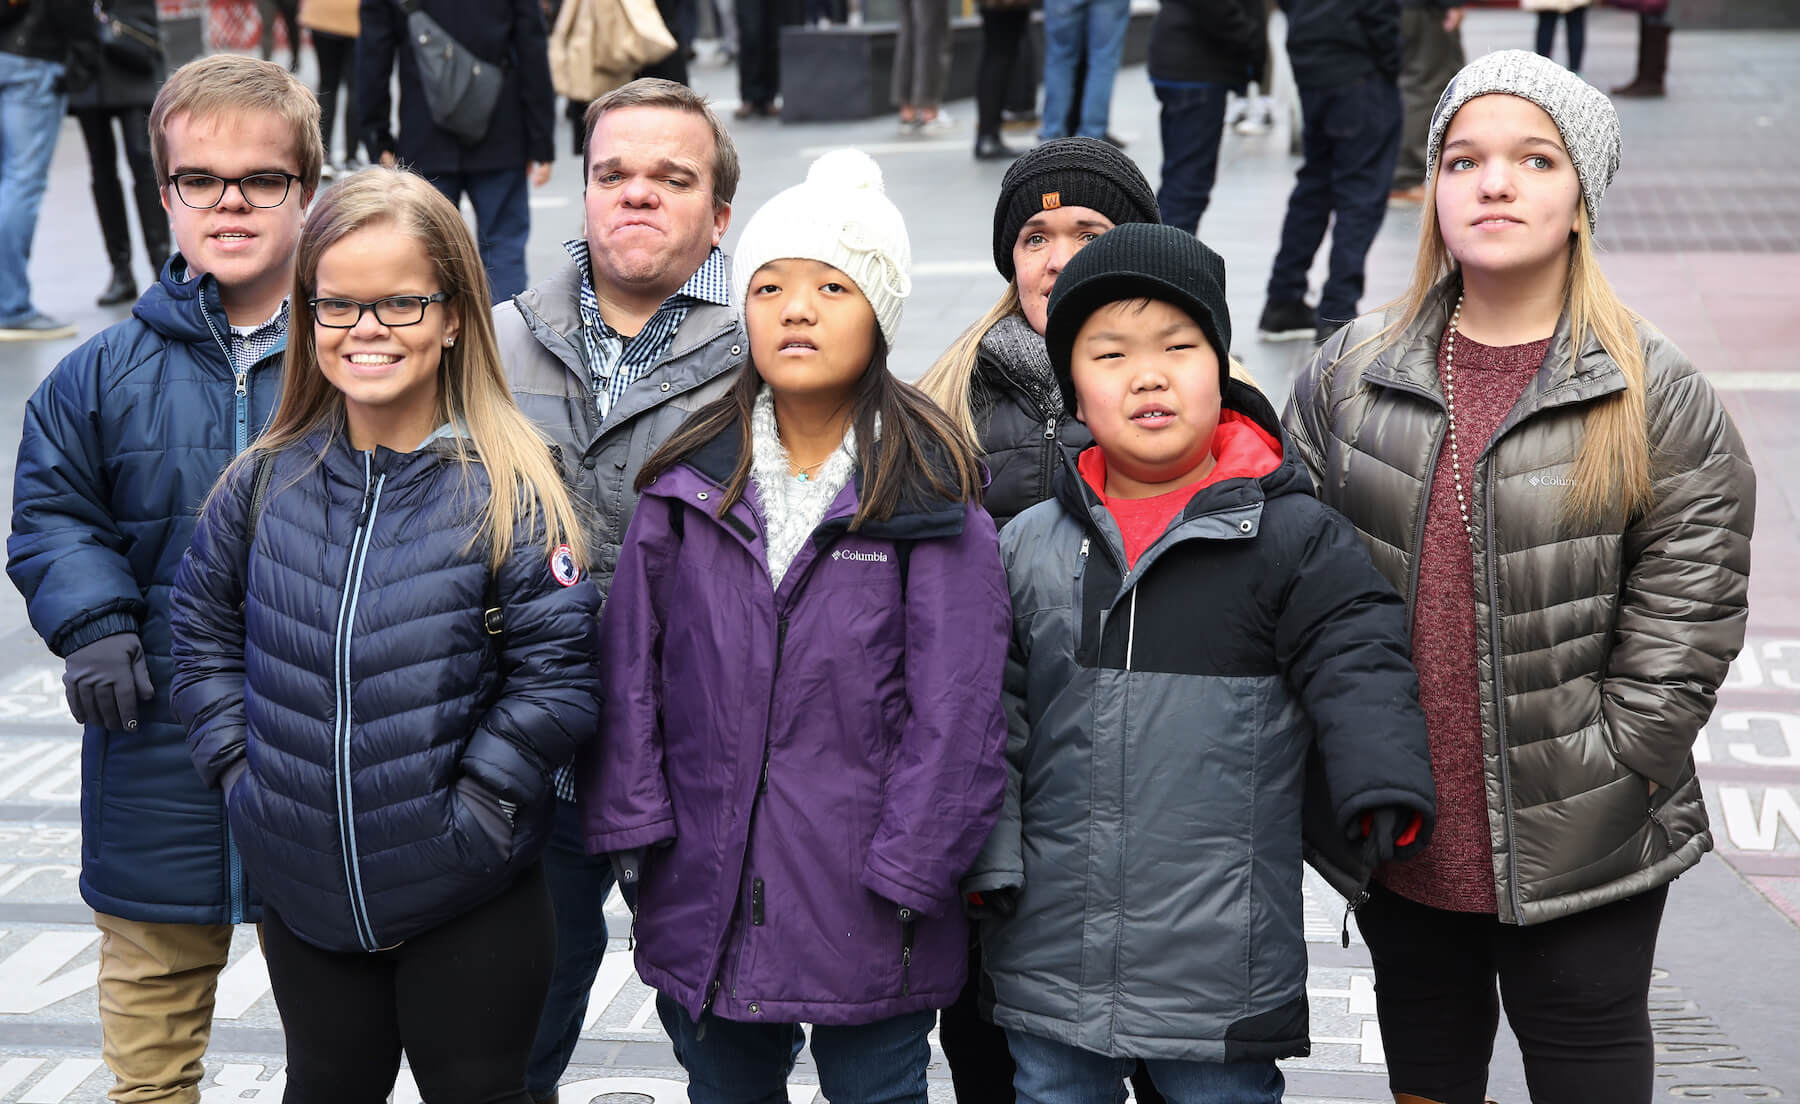 The '7 Little Johnstons' cast standing together outside in cold weather